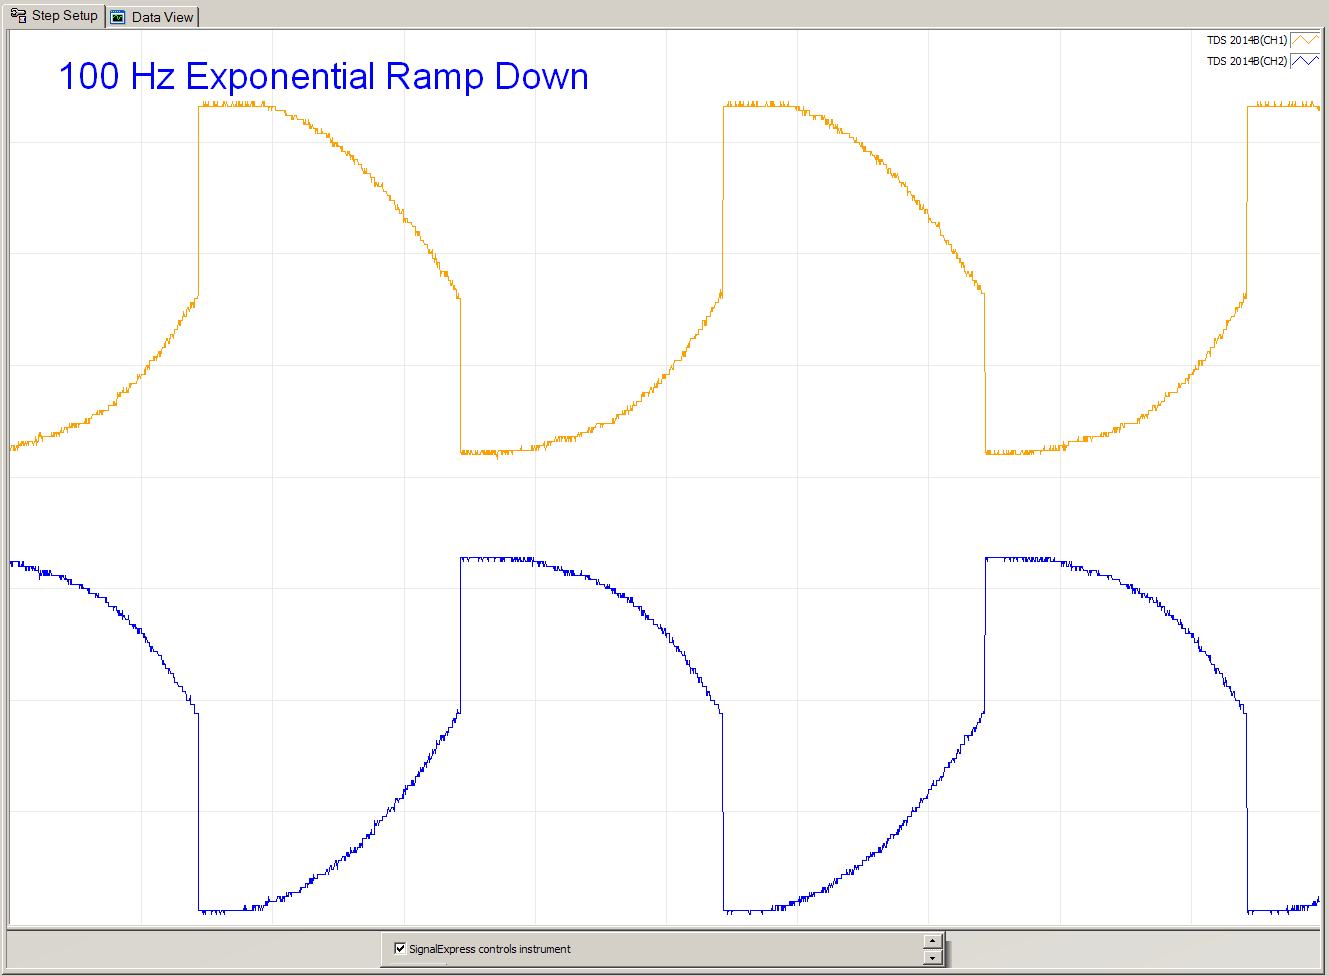 Exponential Ramp Down: